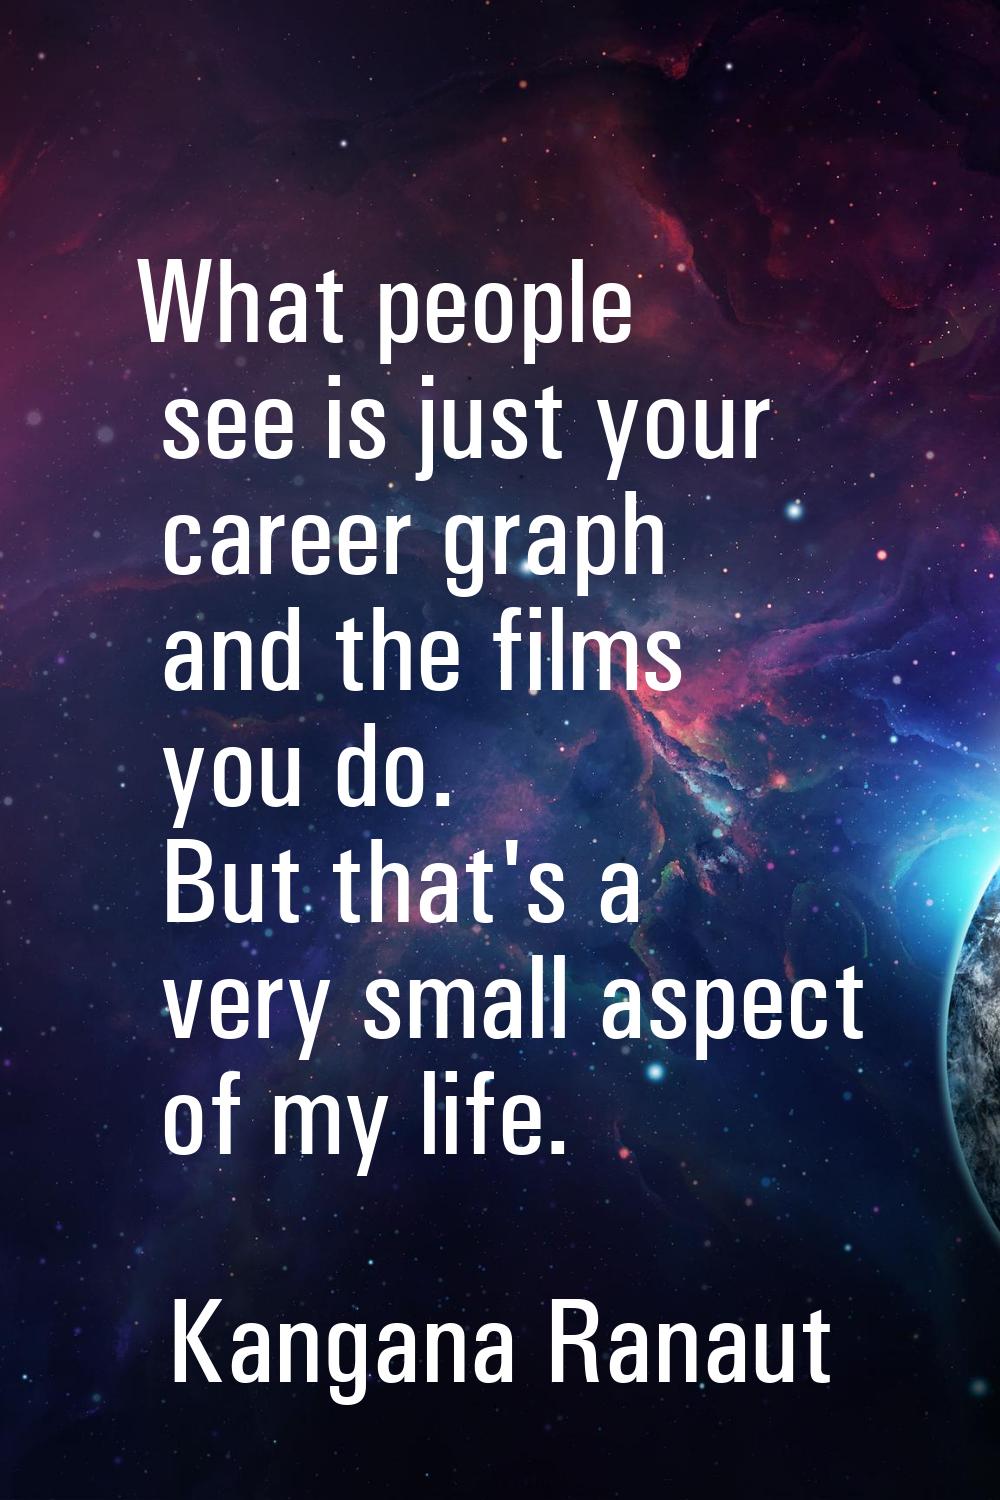 What people see is just your career graph and the films you do. But that's a very small aspect of m